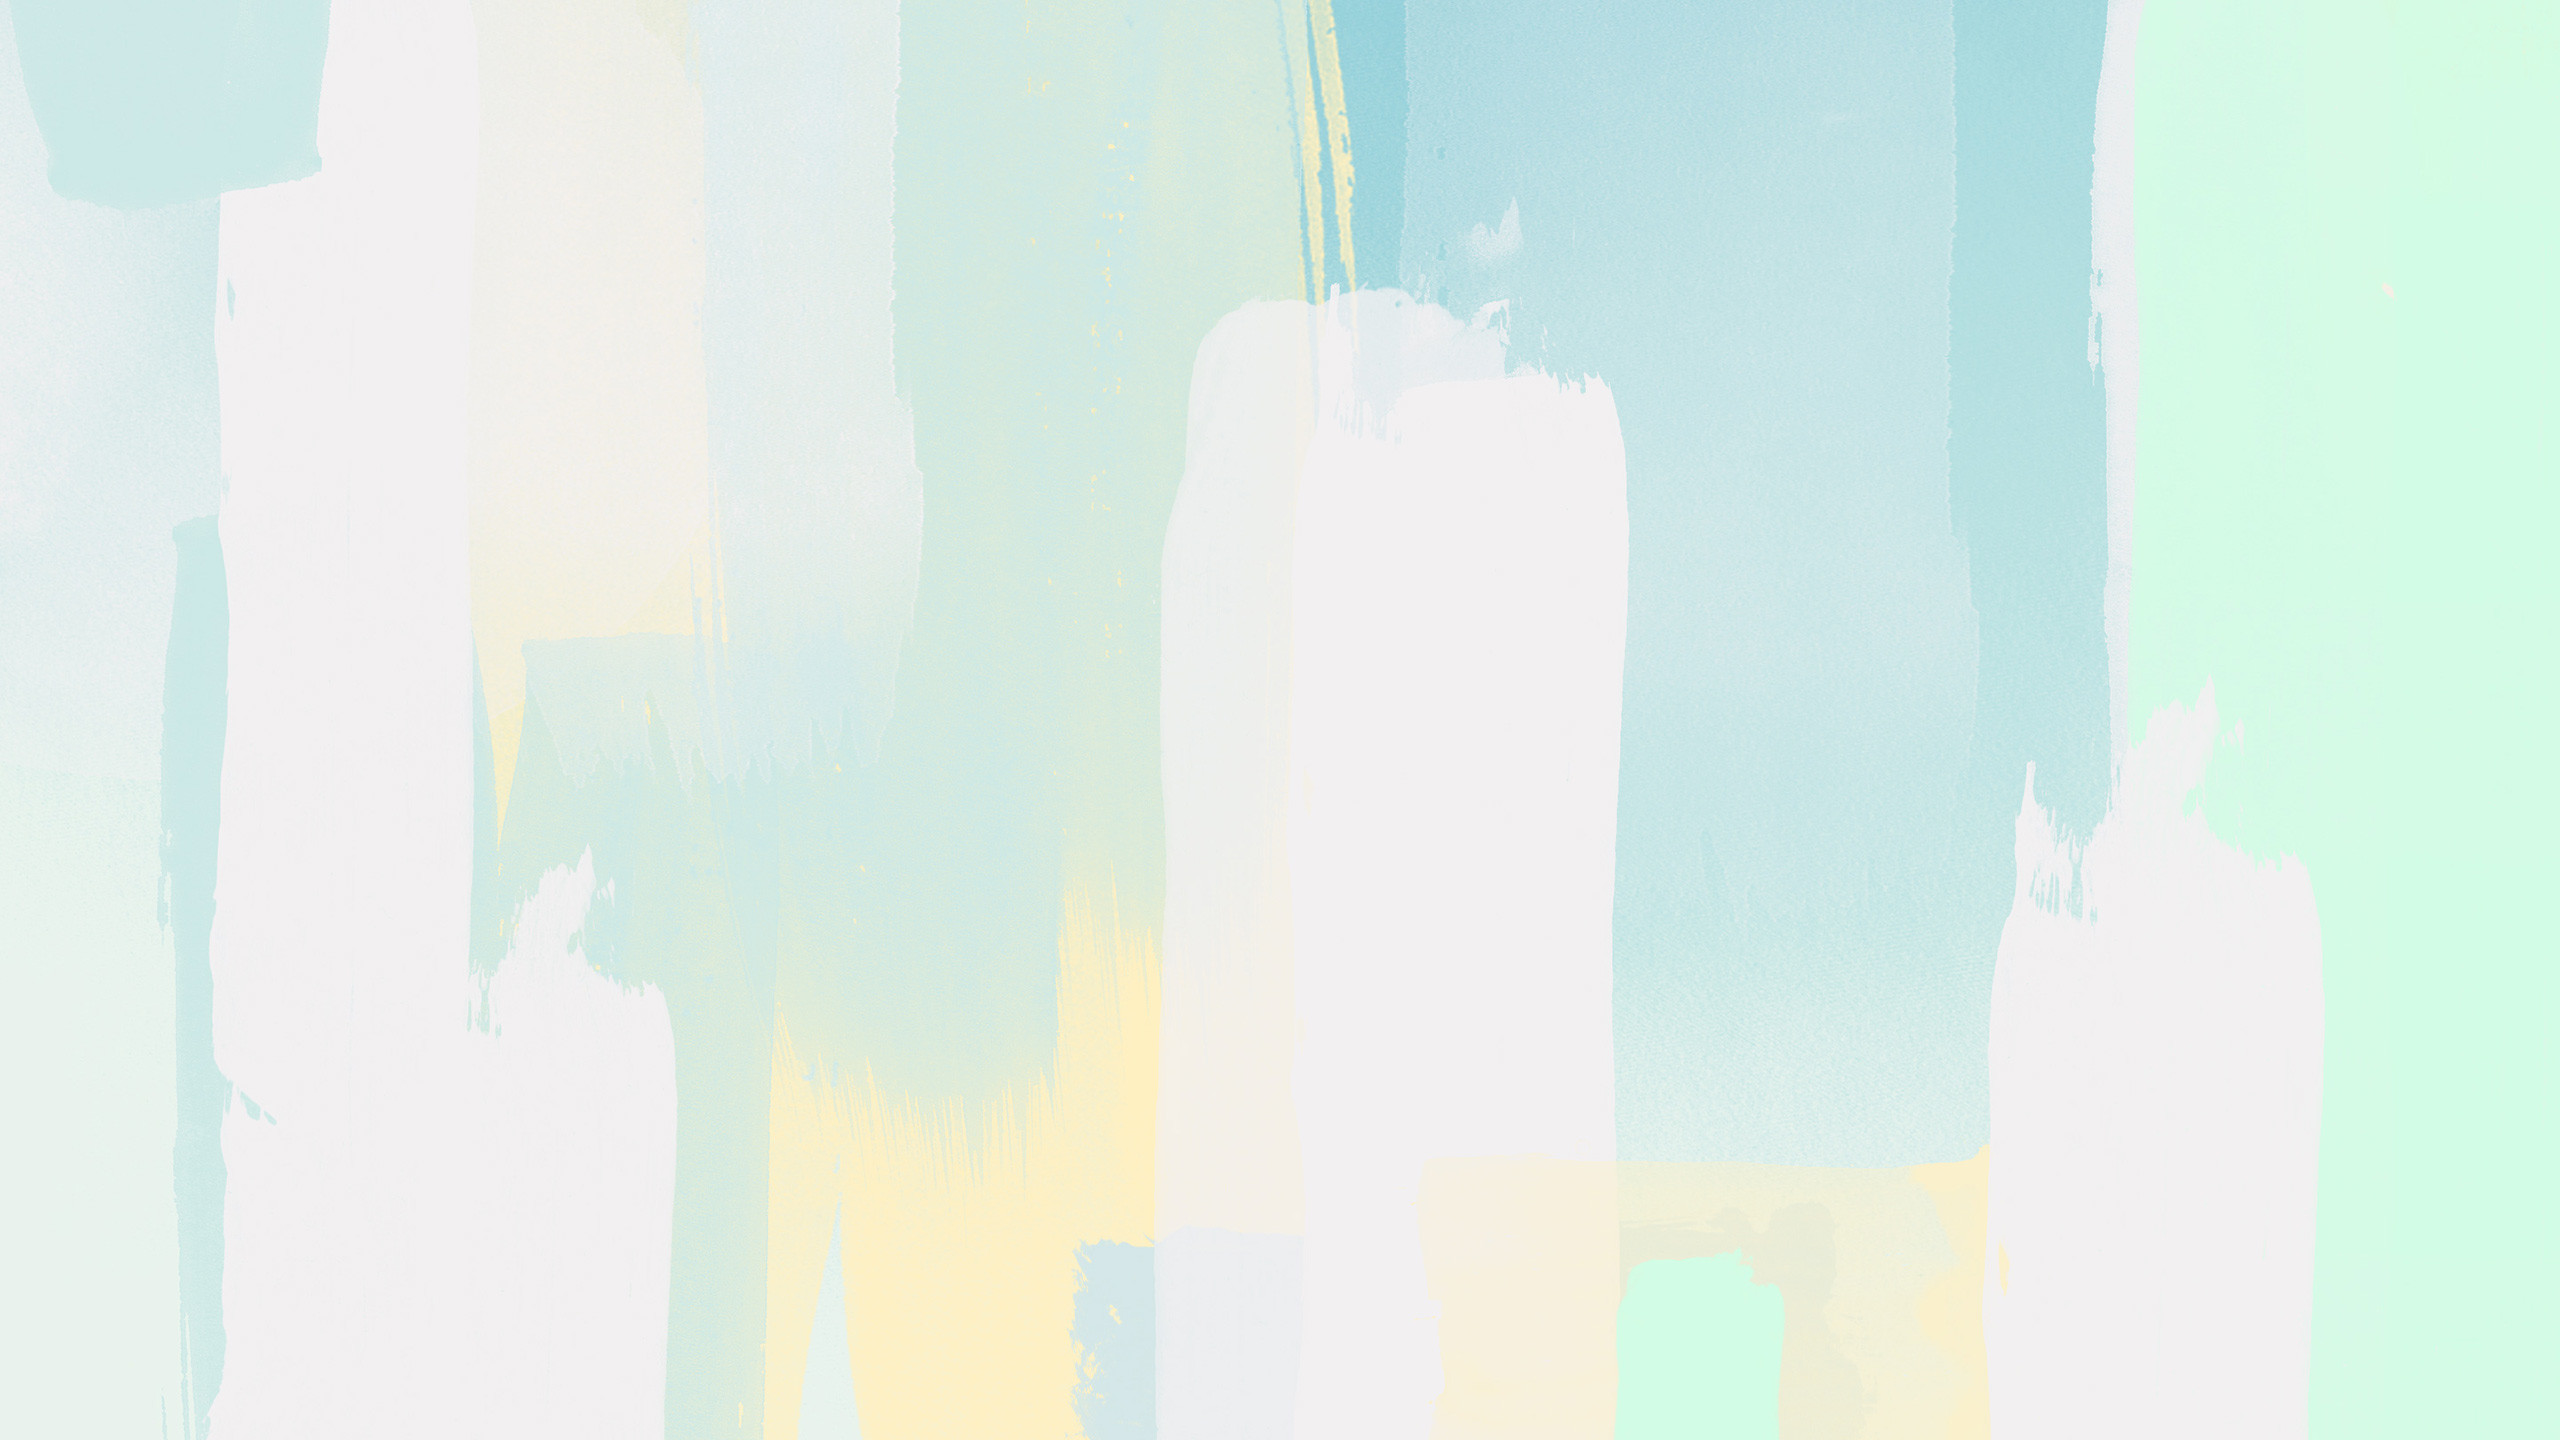 2560x1440 I like the calming and casual brush strokes but would want the colors  changed. Original Â· Blue YellowMint GreenBrush StrokesWallpaper ...